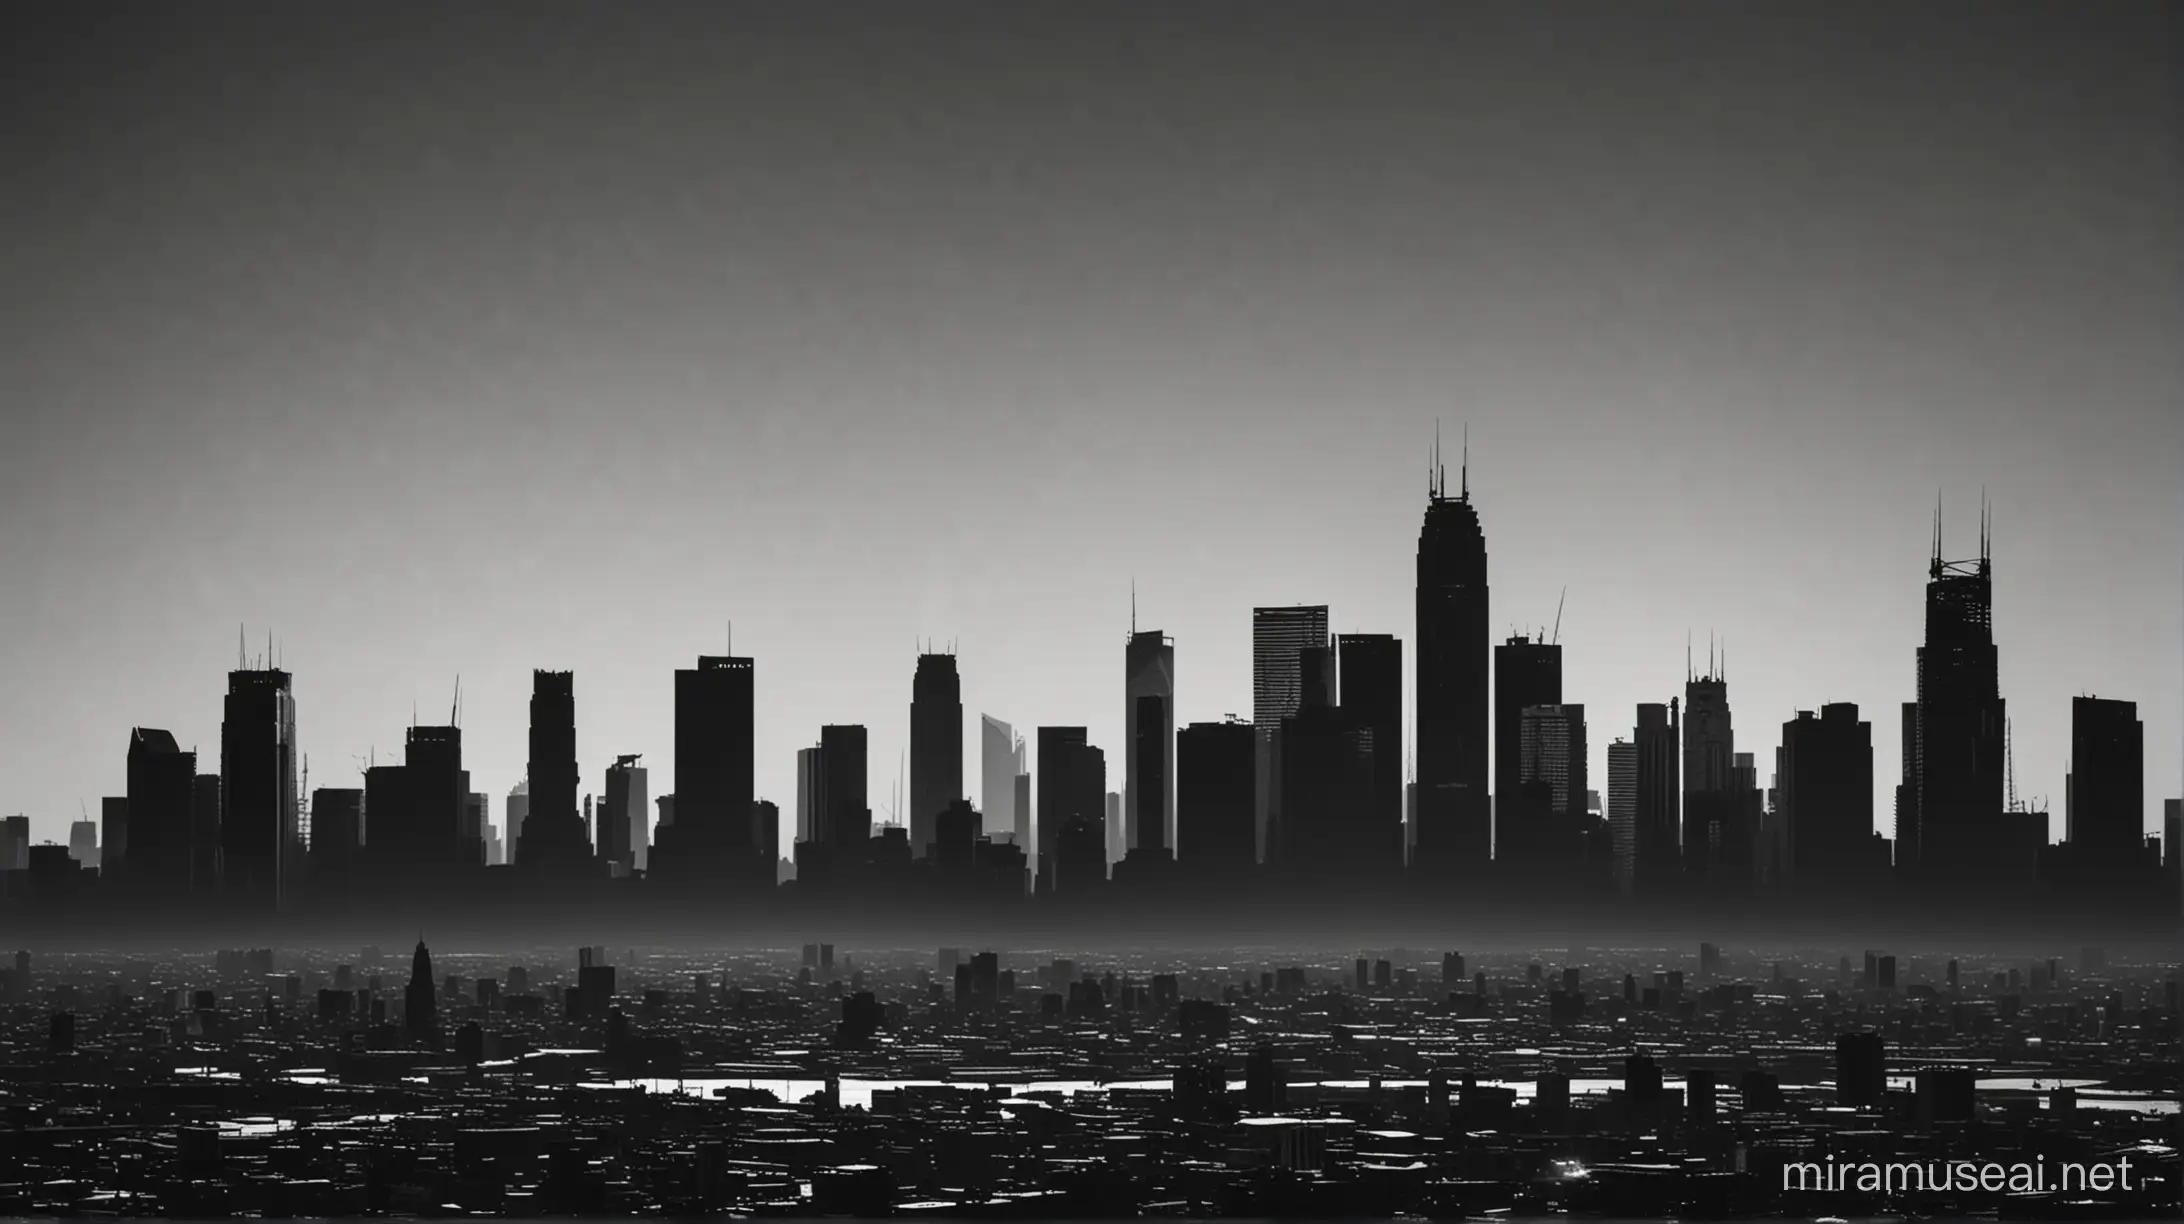 Modern City Skyline with Expansive Negative Space Inspired by Roger Deakins Cinematography